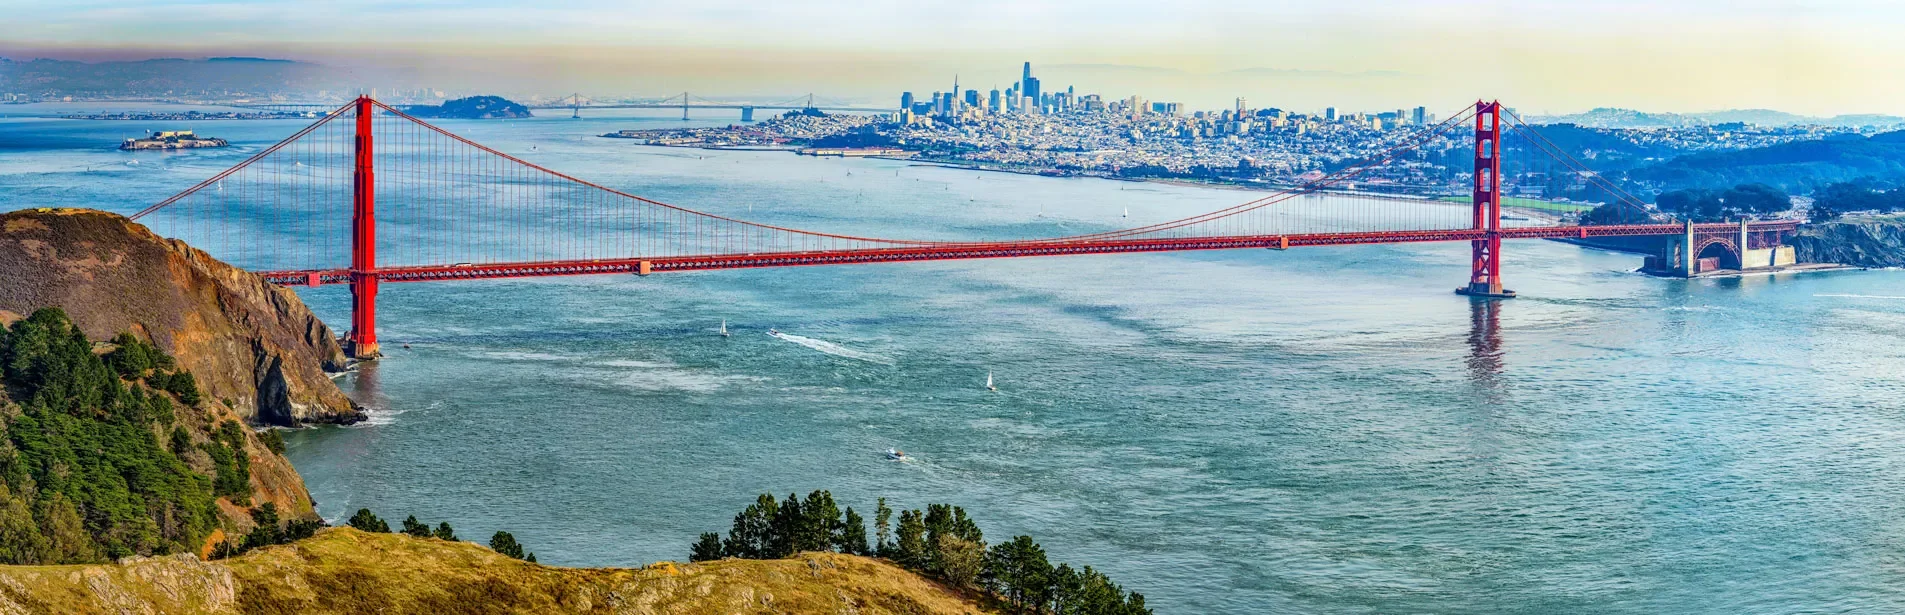 aerial image of the golden gate bridge and san francisco bay in the day time